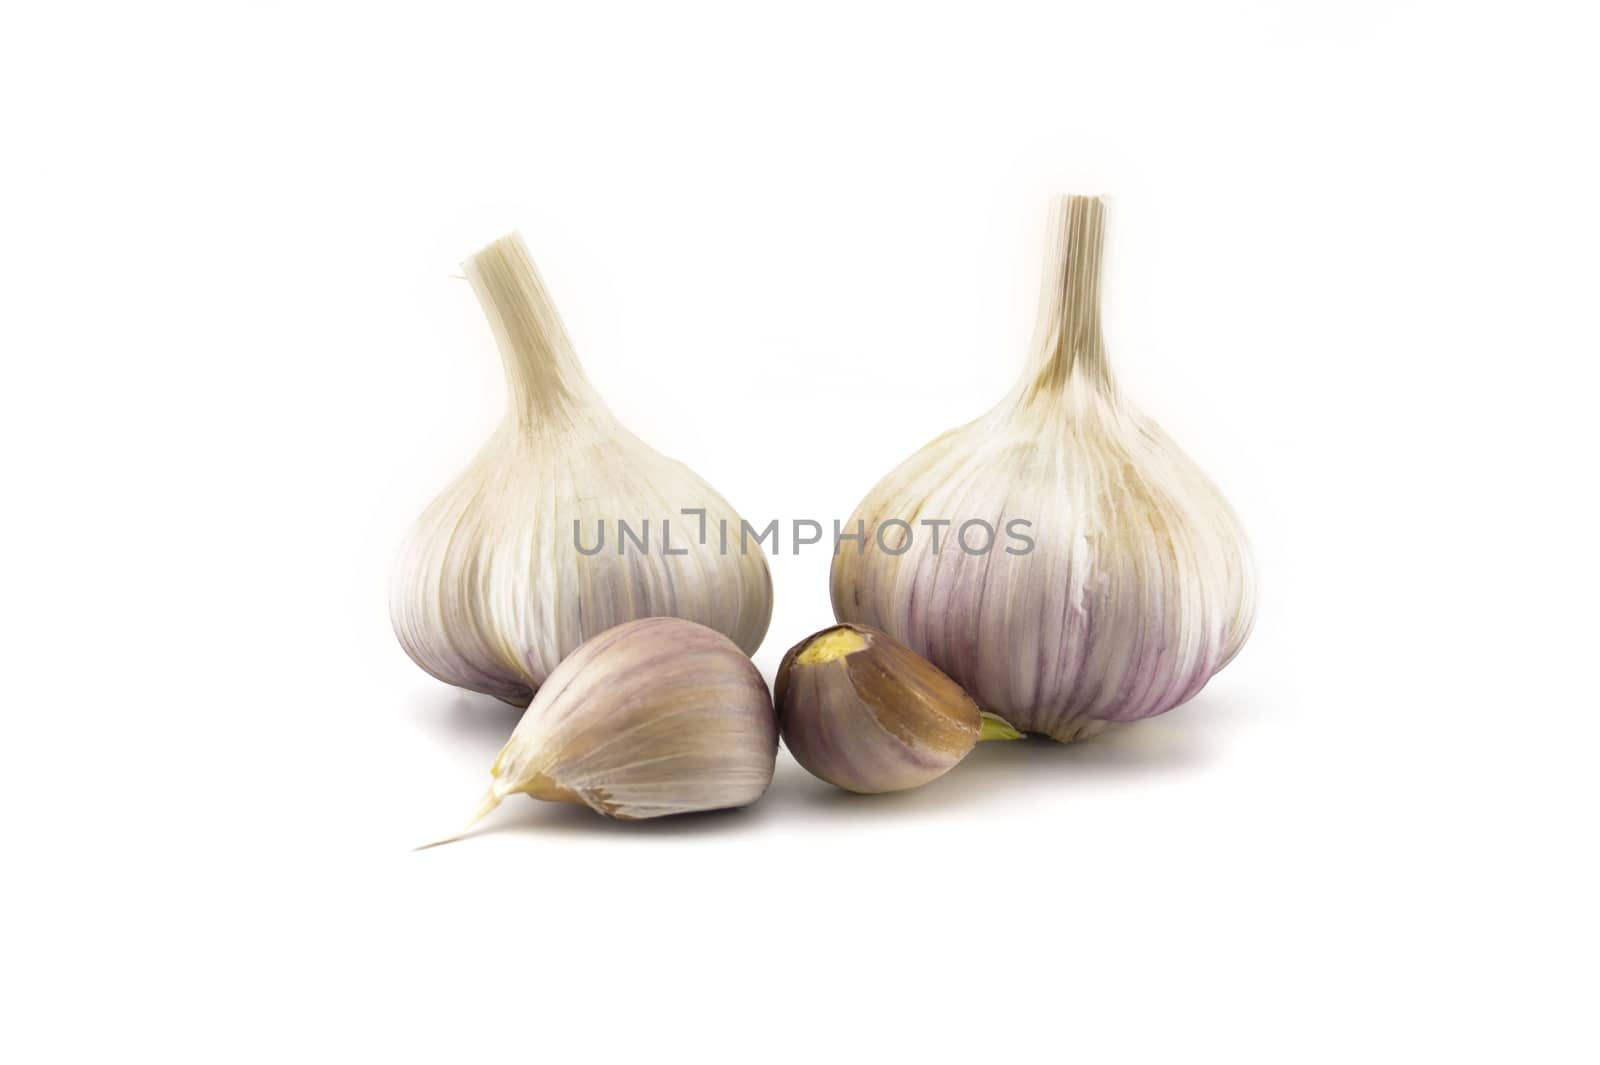 Garlic bulbs and cloves in close-up isolated on white background